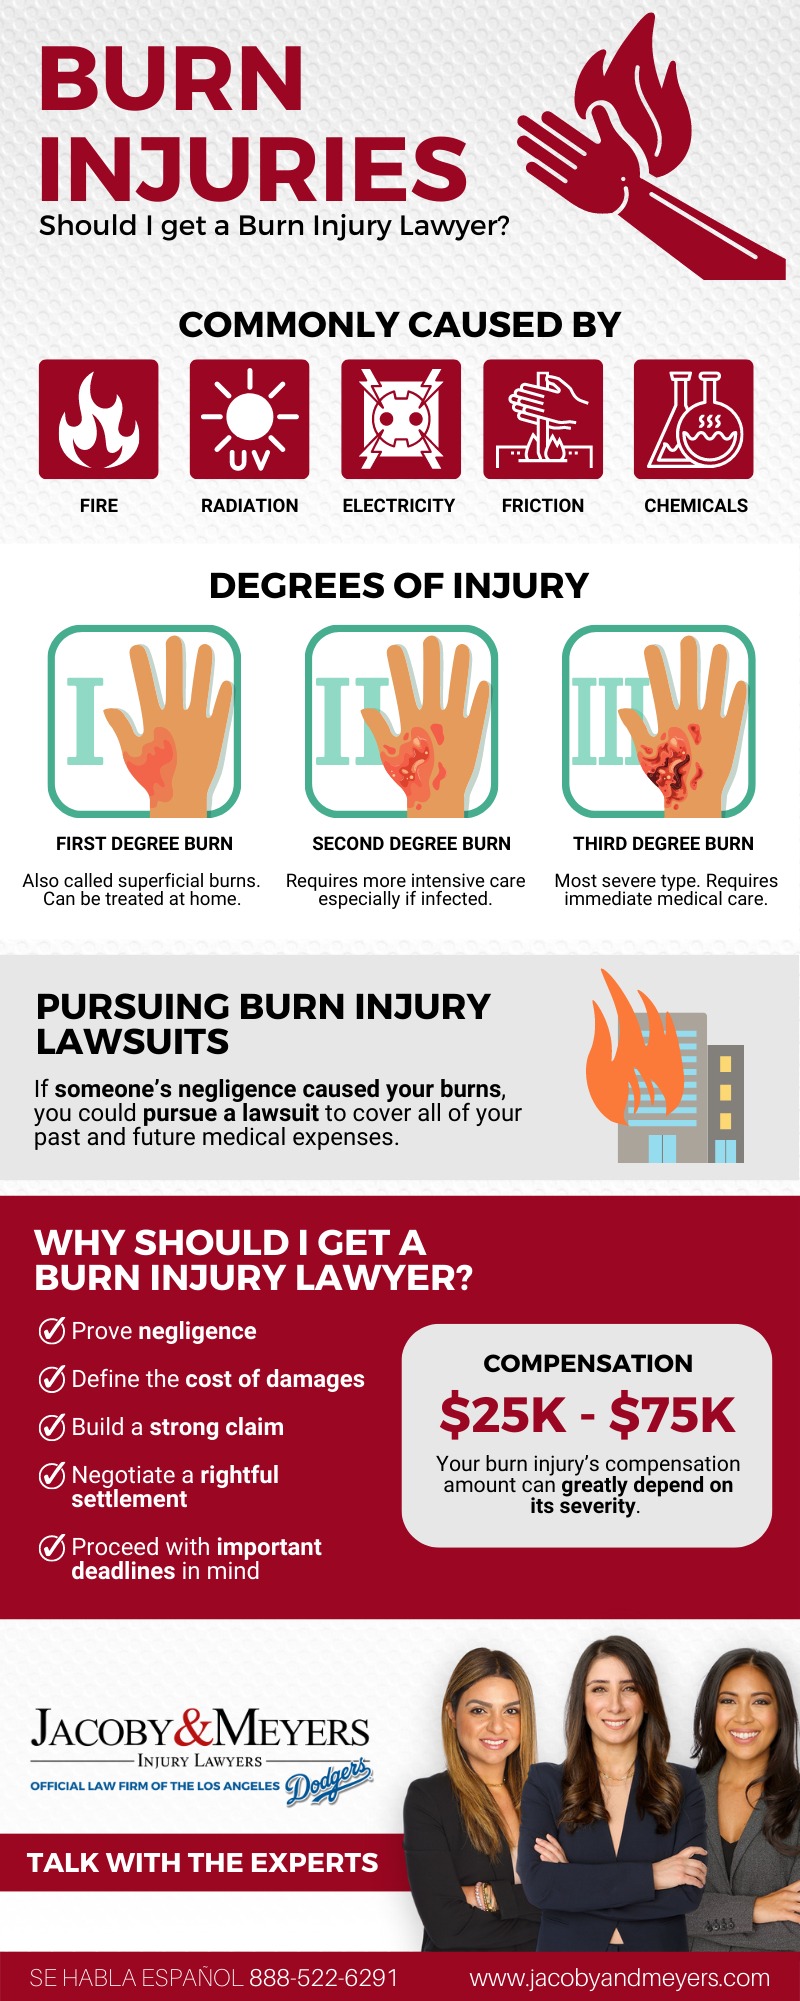 Should I get a Burn Injury Lawyer infographic